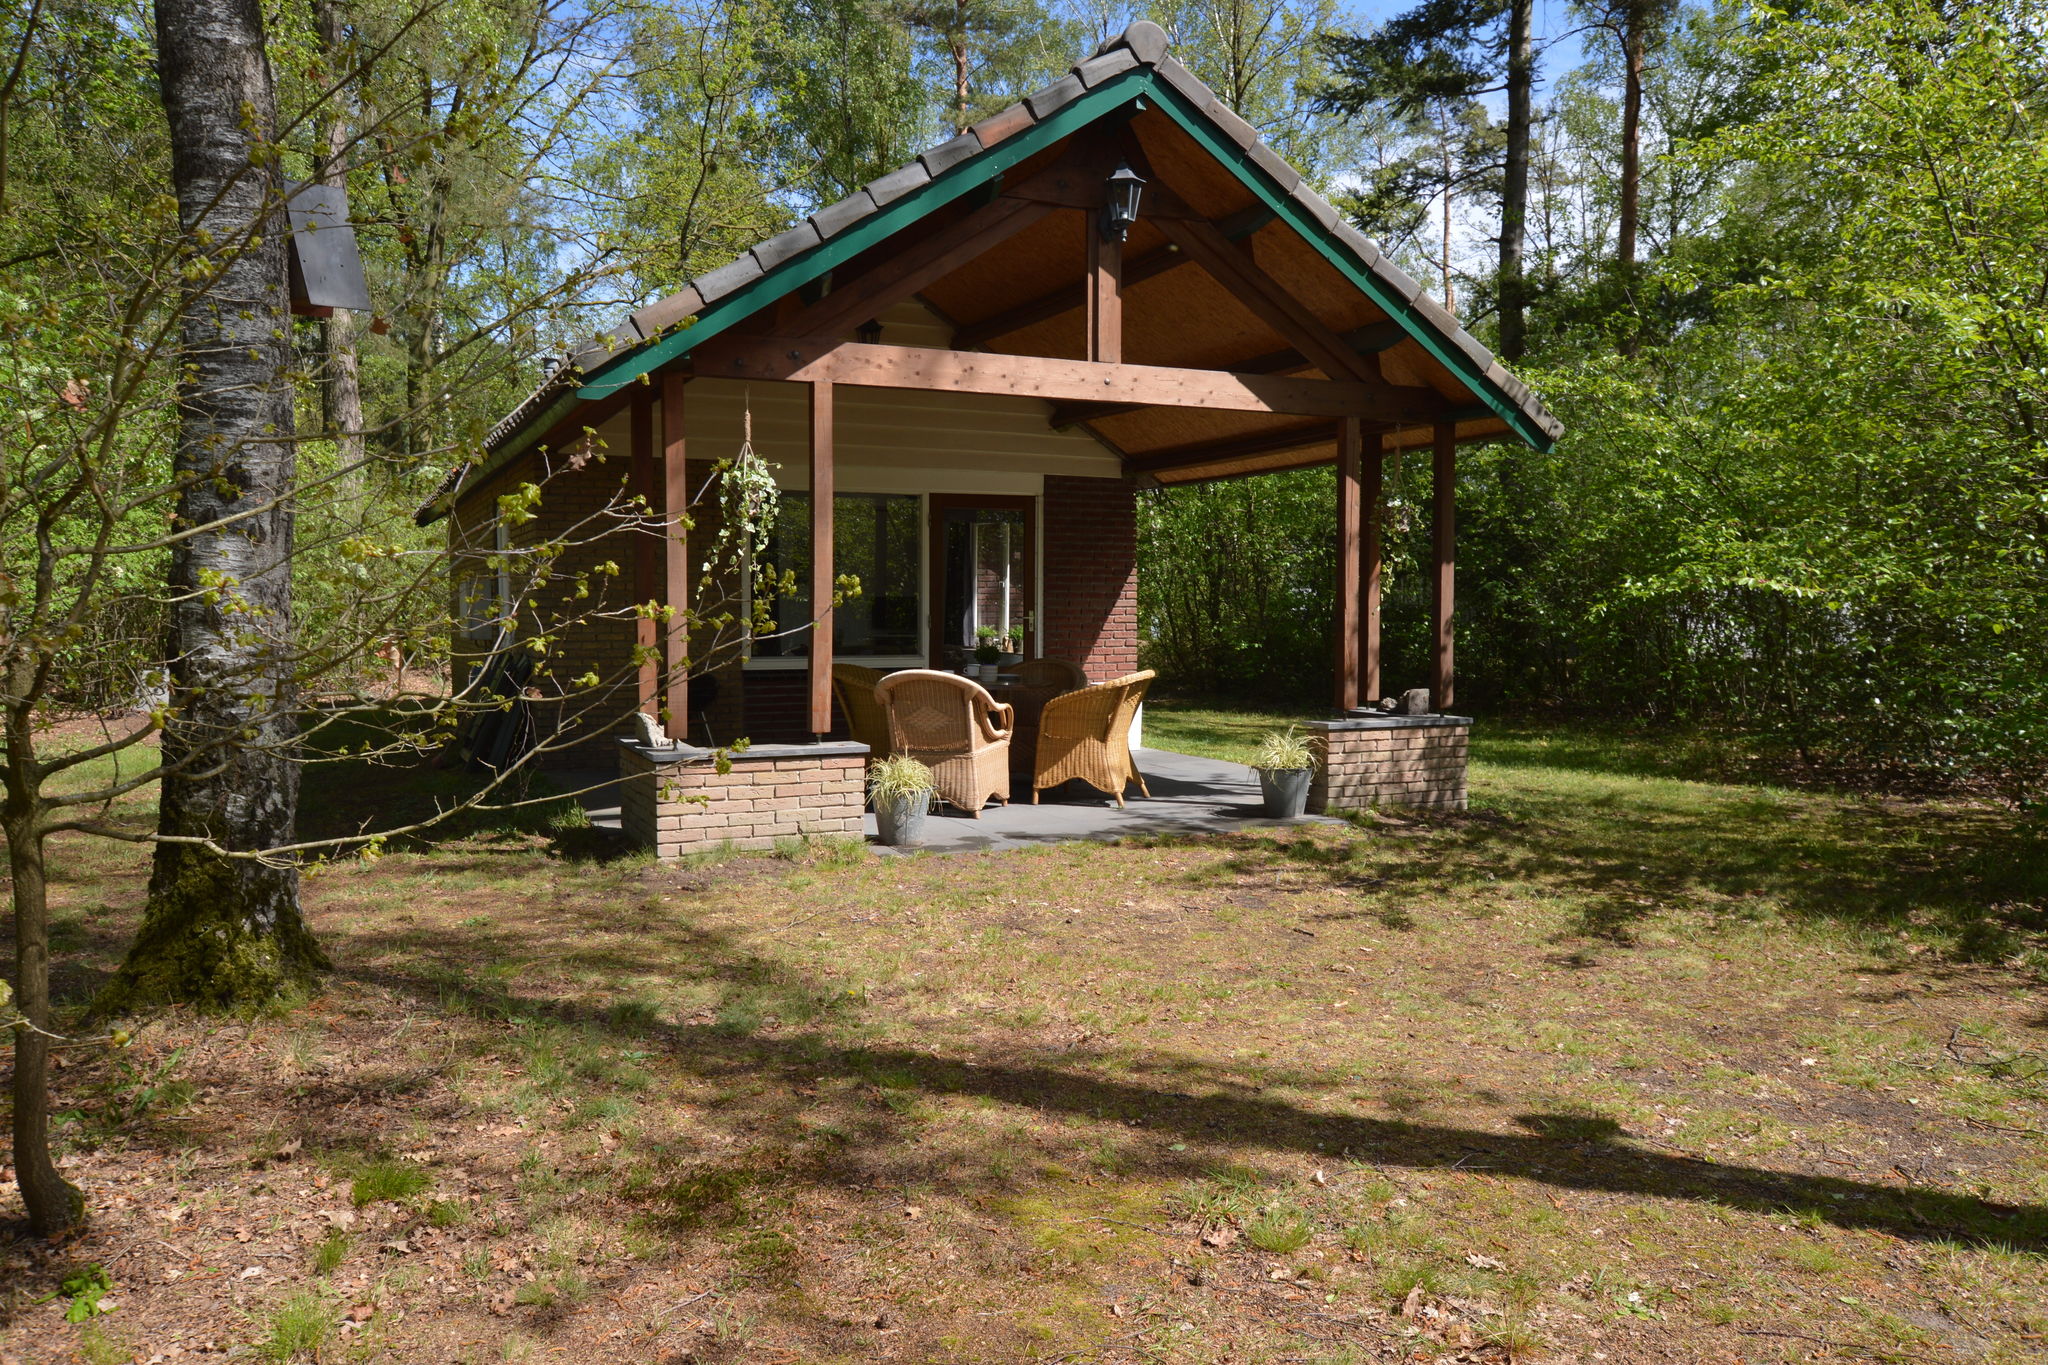 Detached holiday home with sauna, large garden and covered terrace